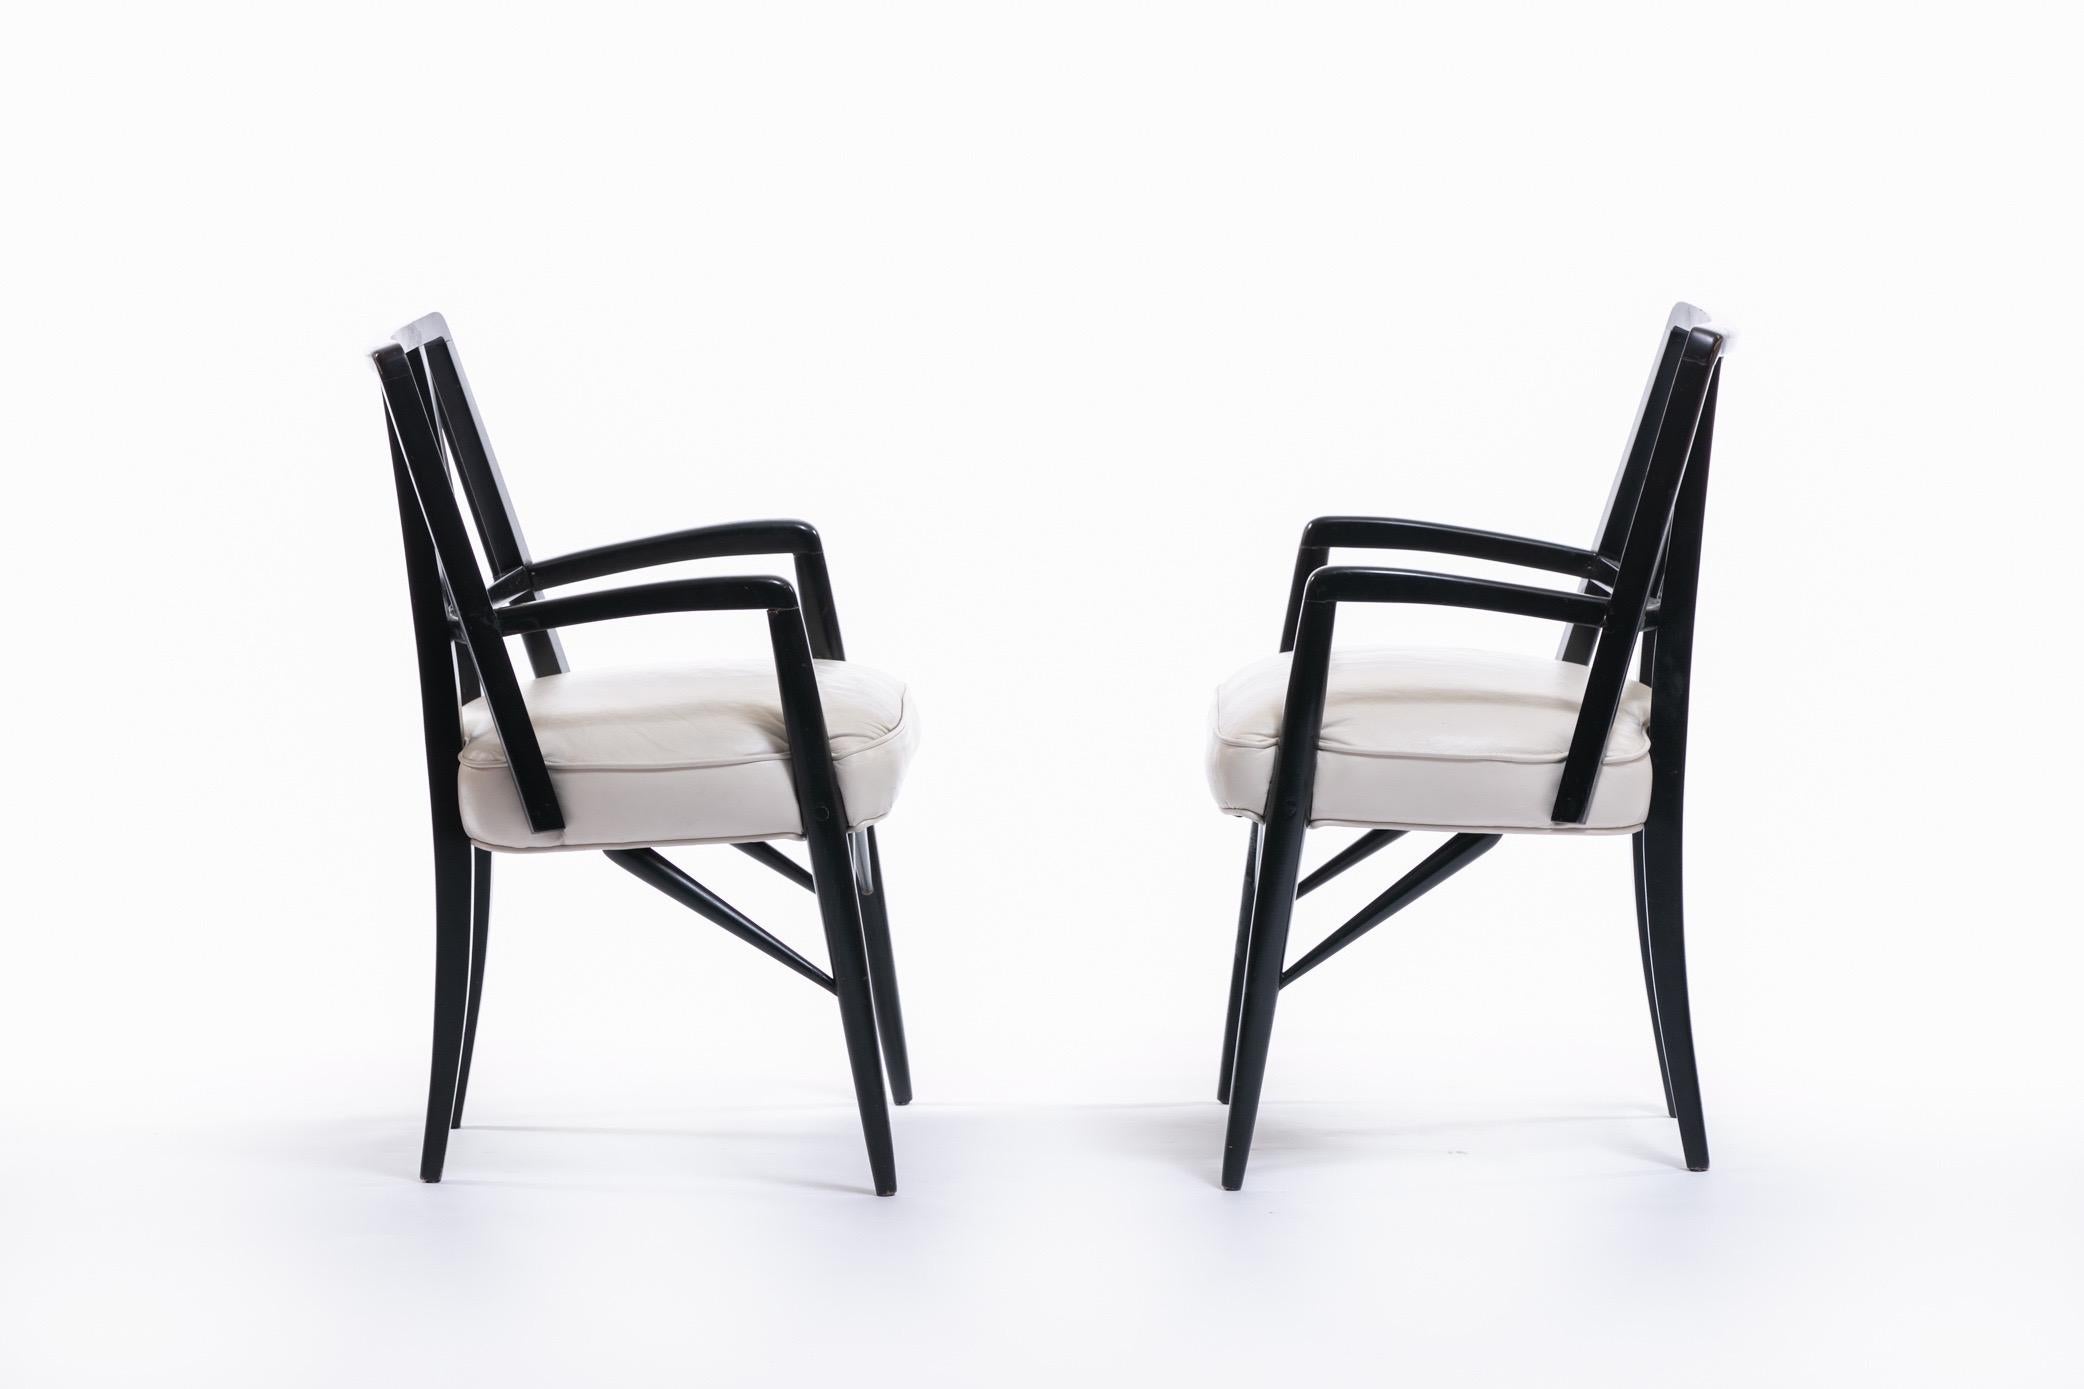 A favorite of Paul Laszlo, these chairs were featured in design projects for the Brentwood Country Club (see photo), Mr. Laszlo's personal residence, and the Fausto M. Ricci family. Original black lacquered wood and ivory leather seat. The arm